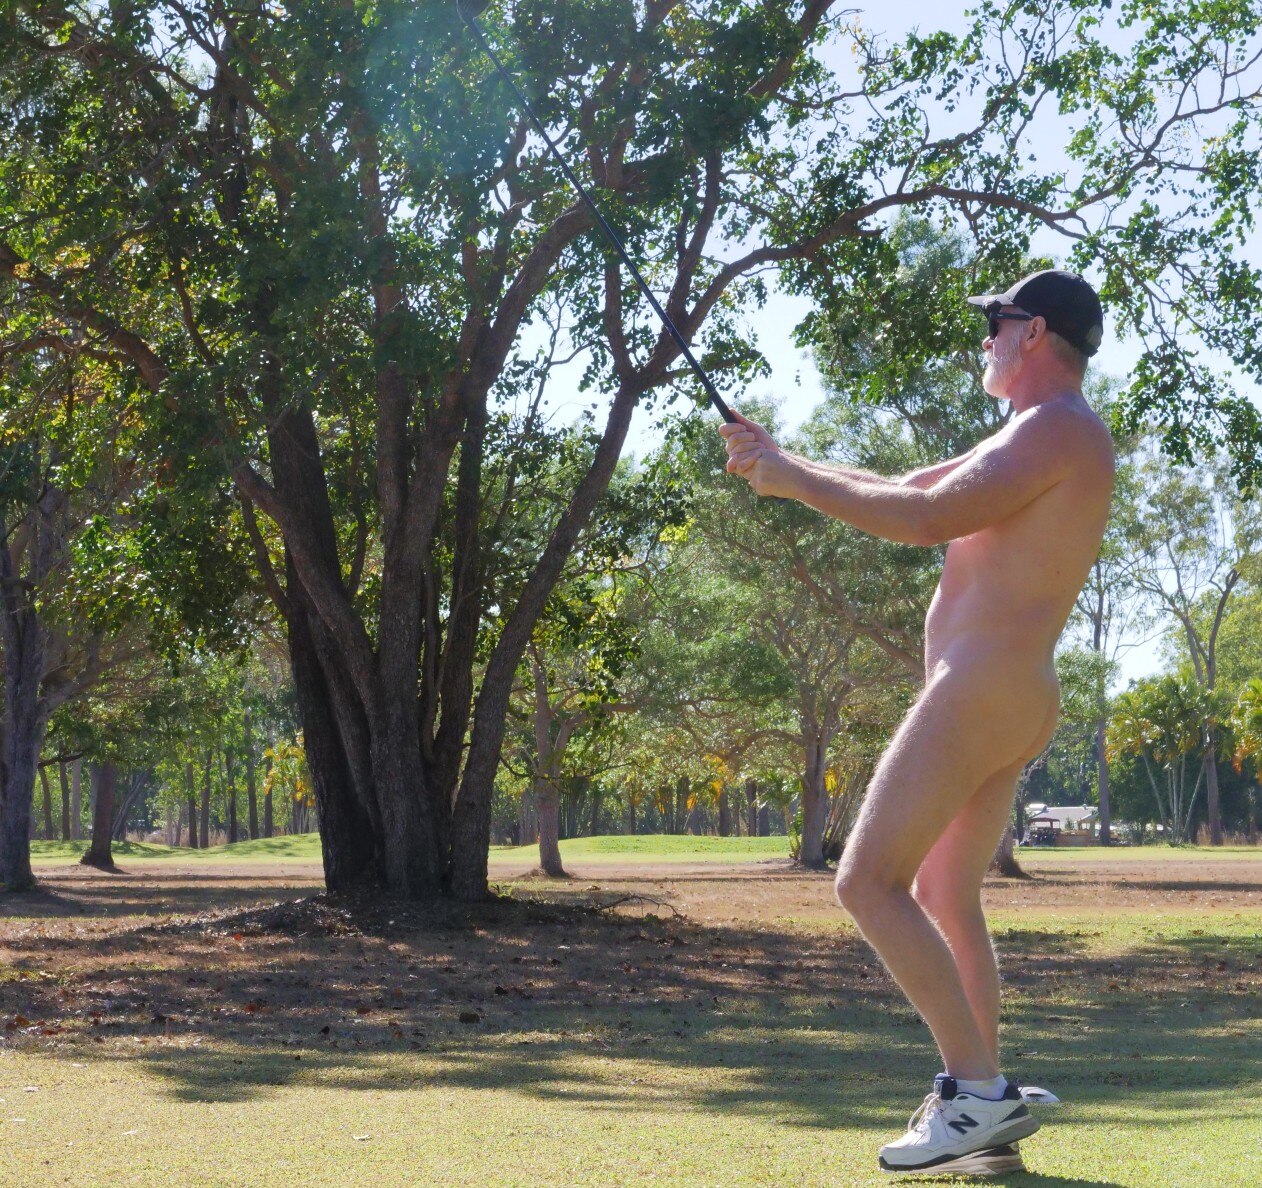 Naturists celebrate body positivity with nude golf, despite record low Darwin temperatures picture